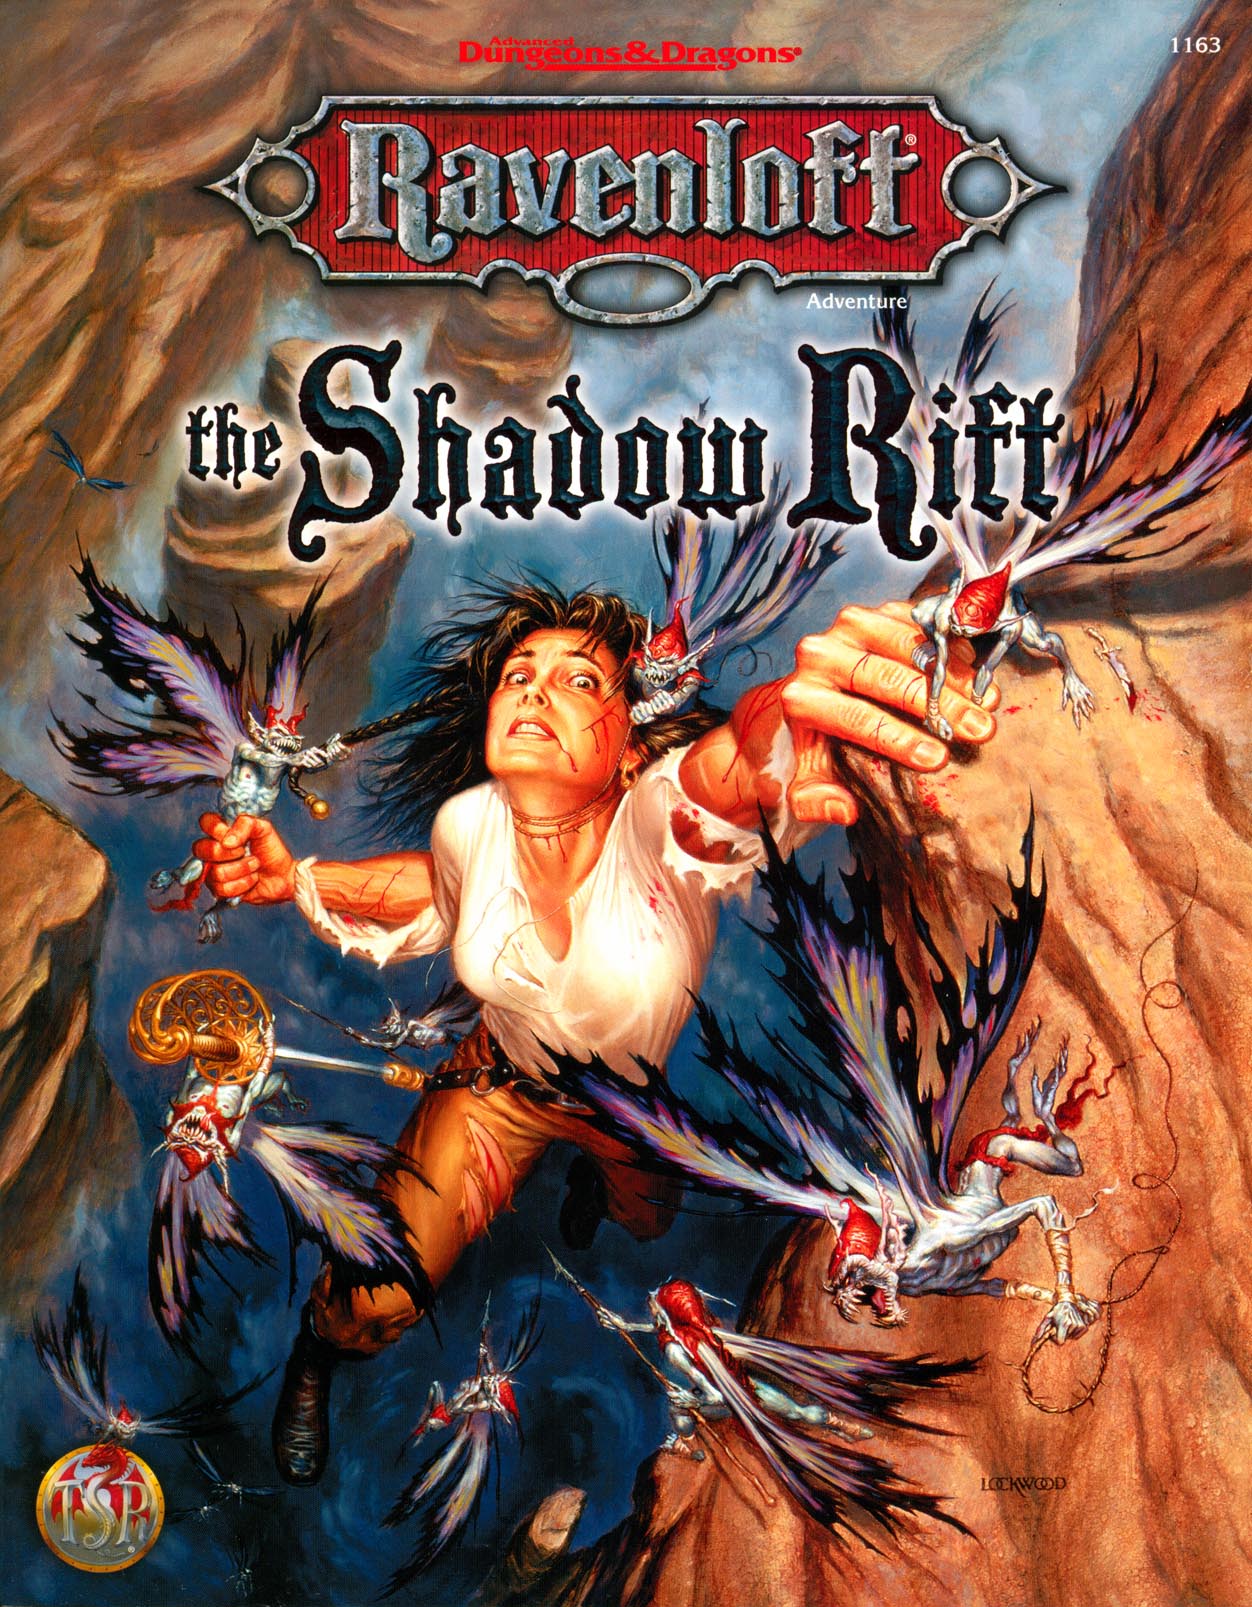 The Shadow RiftCover art